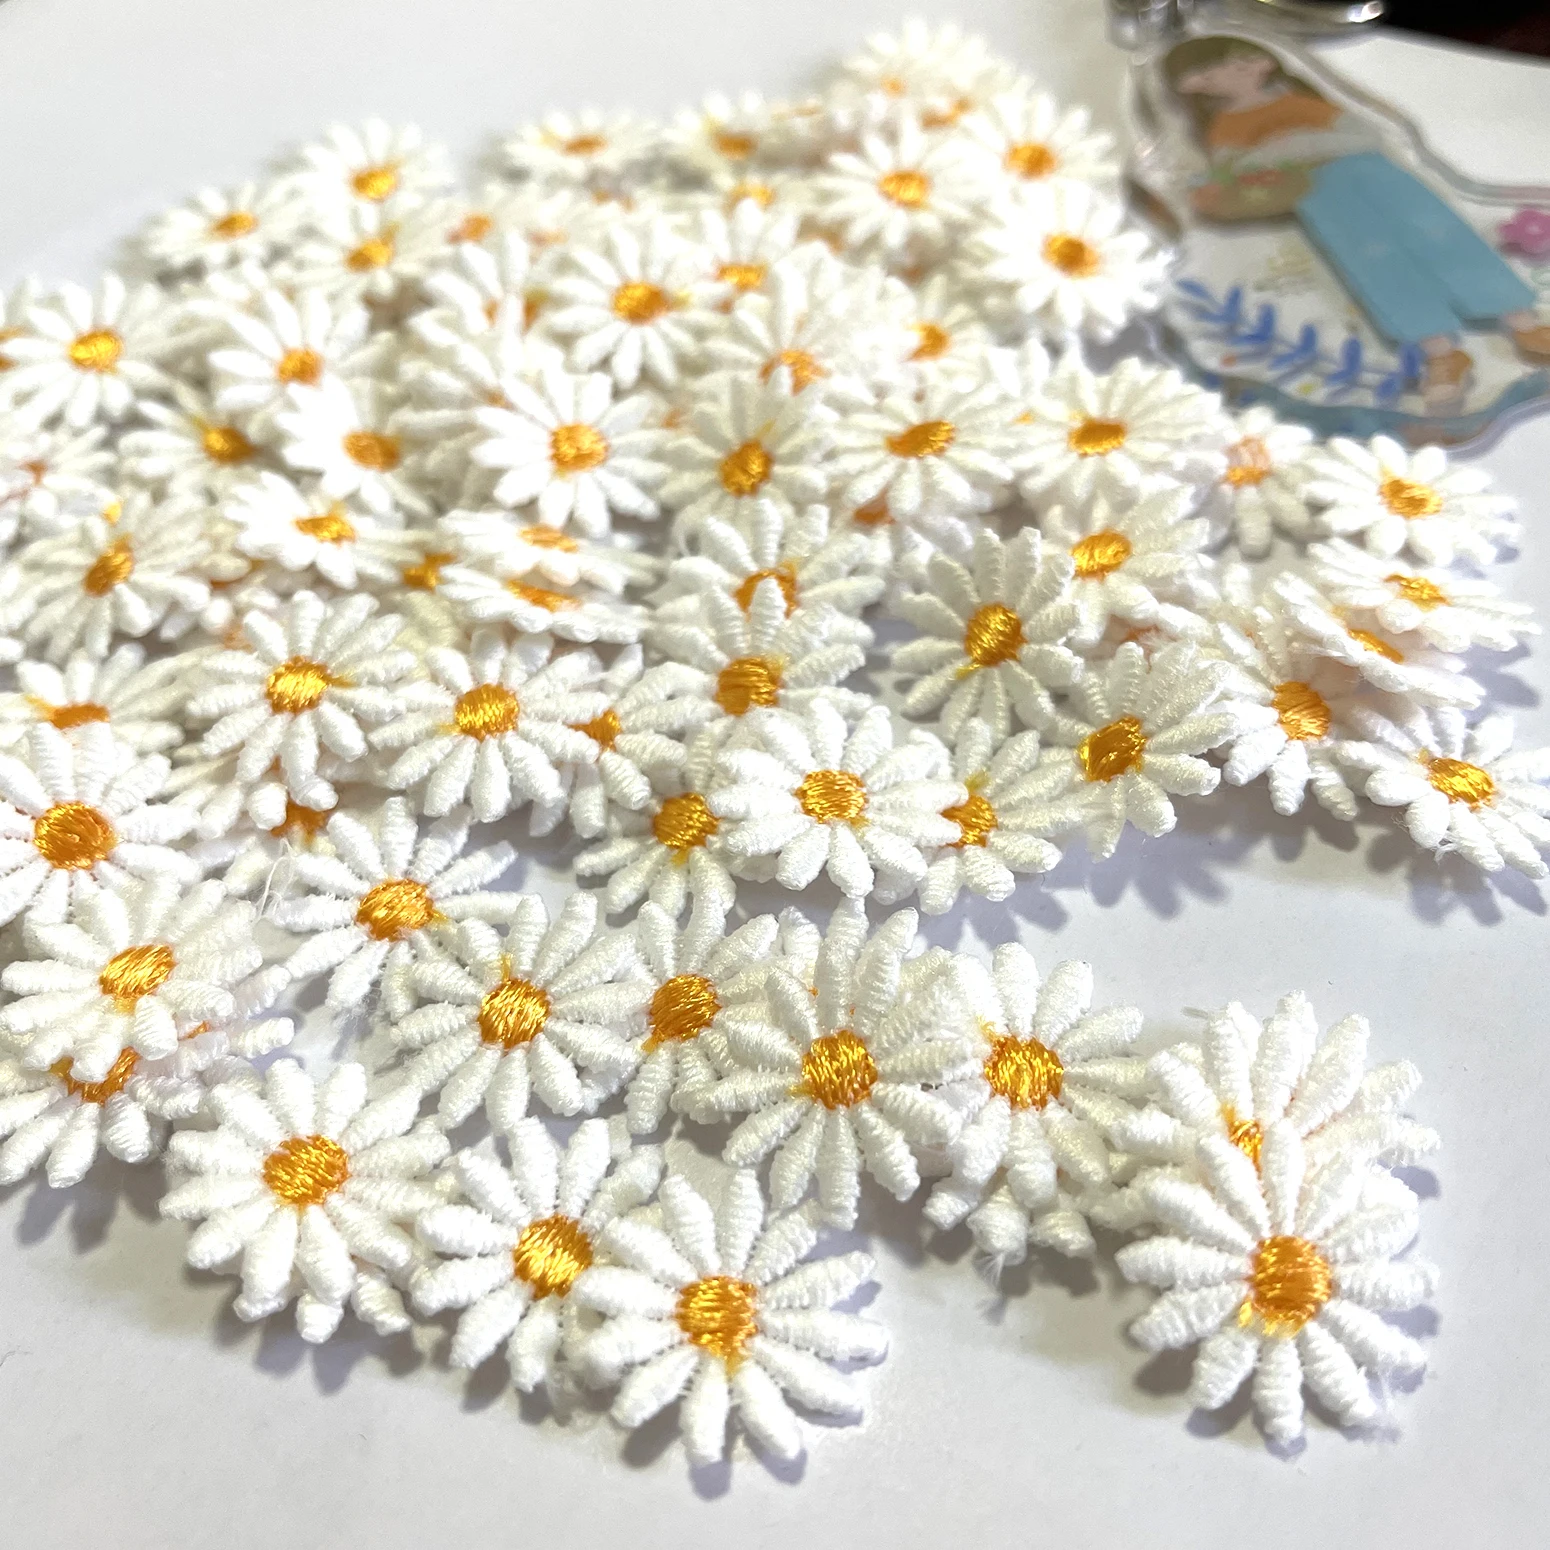 AHYONNIEX 100pcs Mini Daisies Flower Patches Embroidery Sticker Sew on Parch for Clothing Applique DIY Clothes Stickers